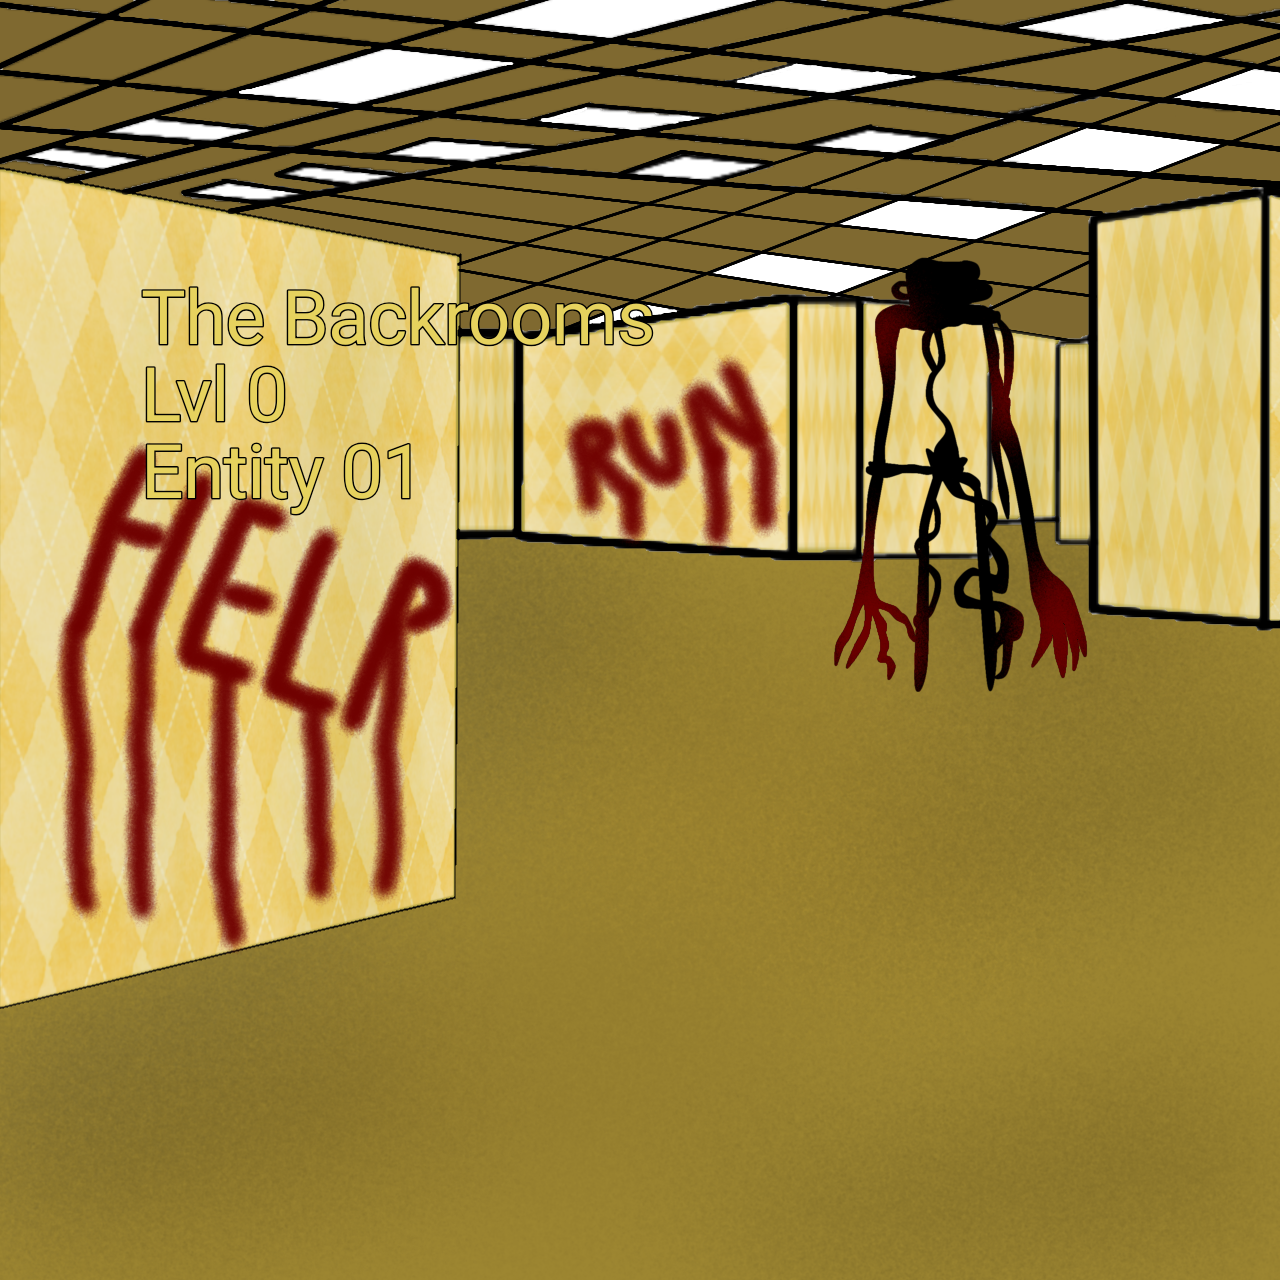 the backrooms level 1 by GroundDwellerr on DeviantArt